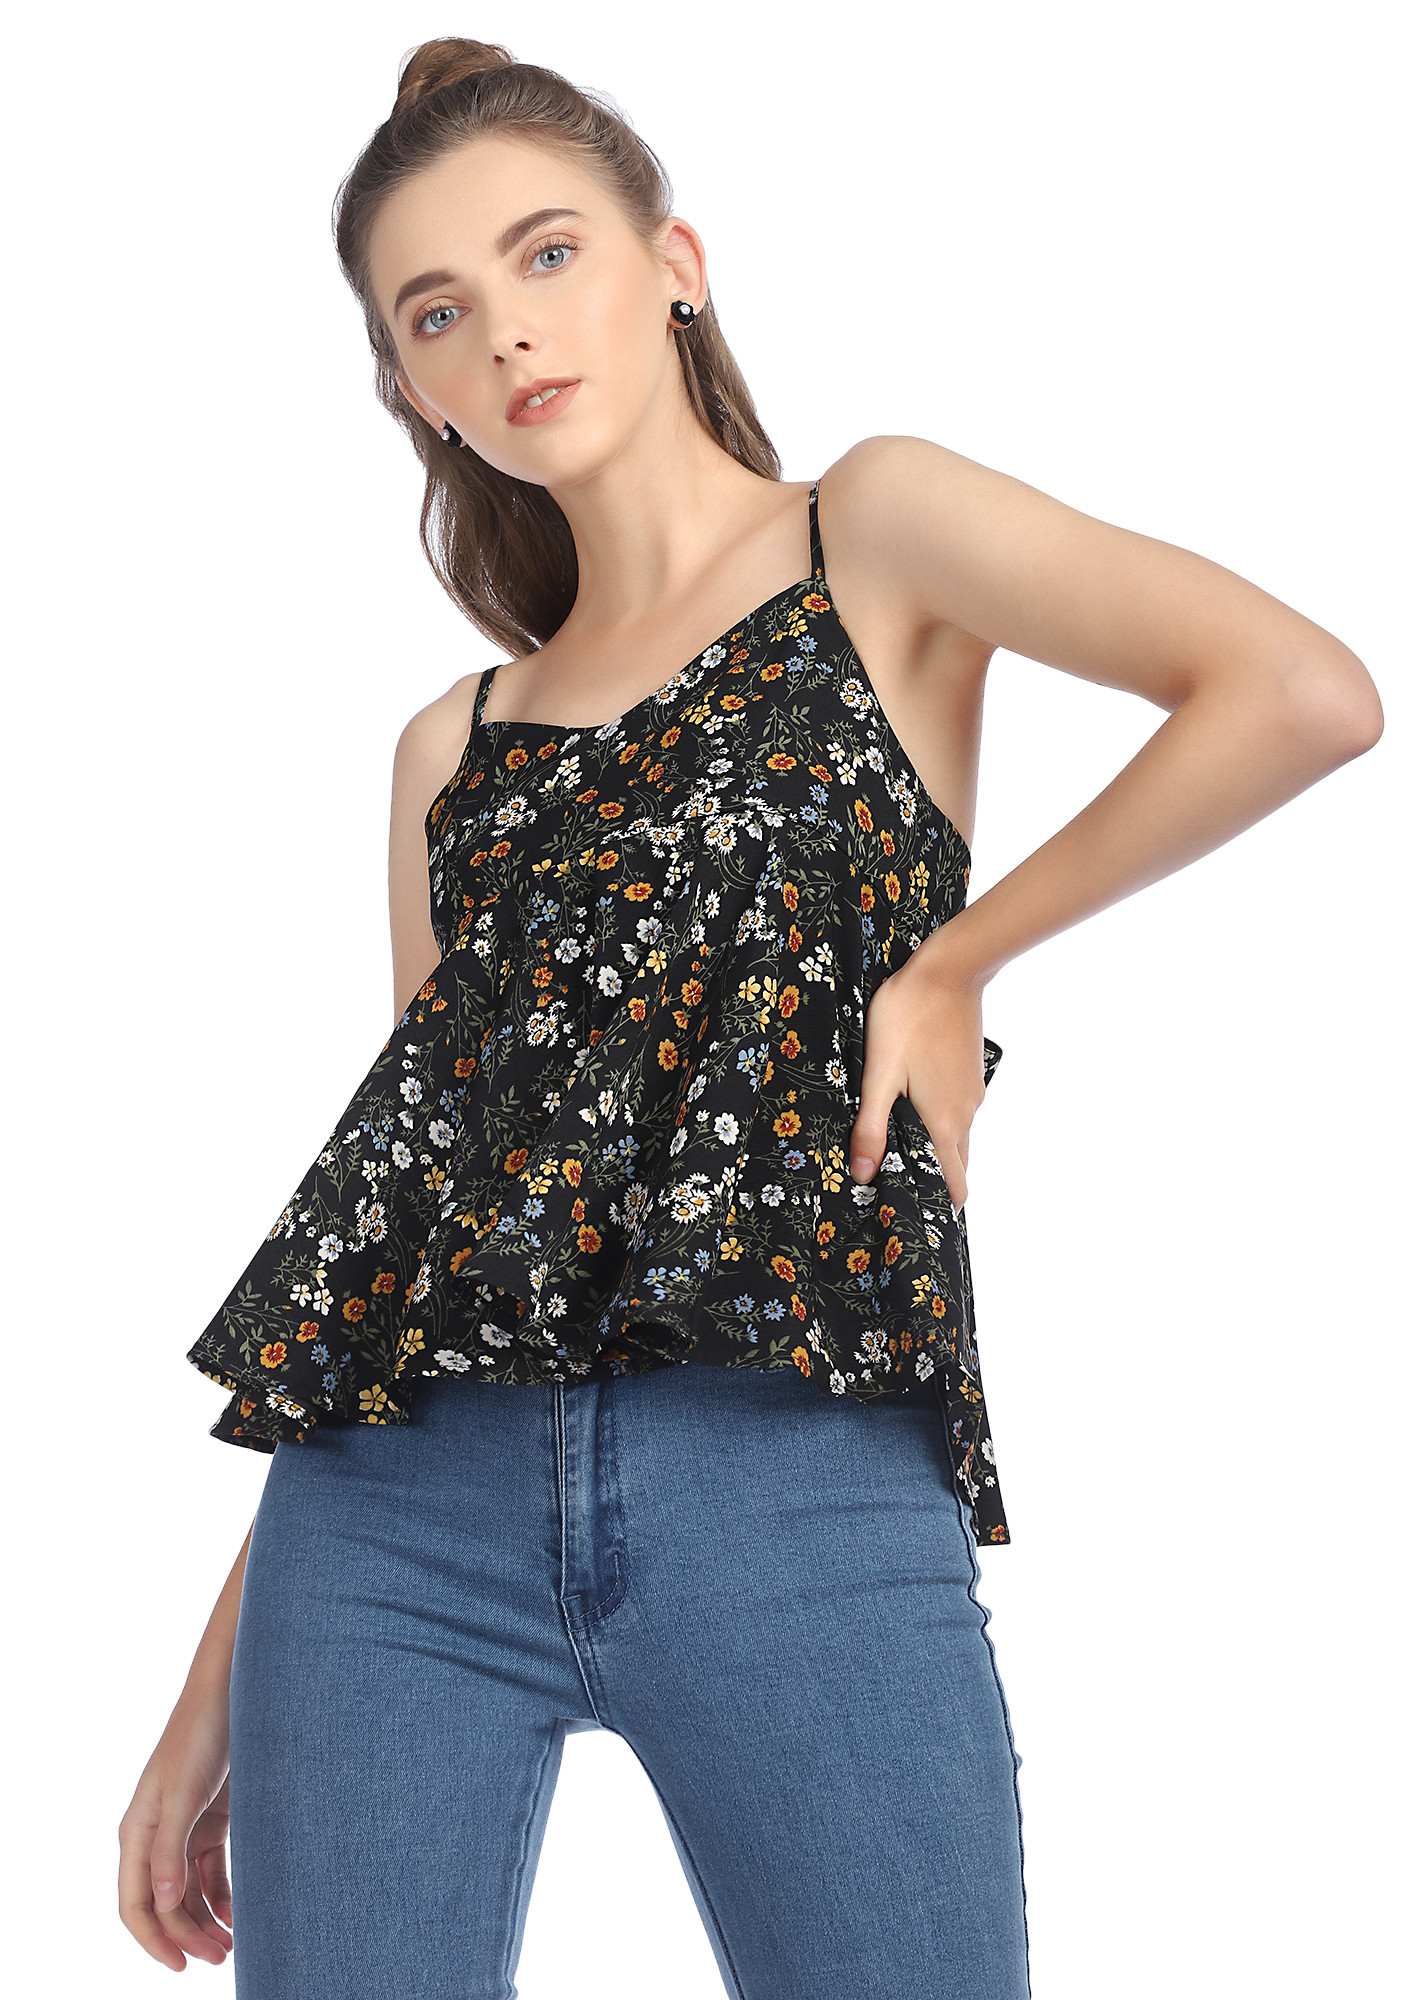 HAVE DANDELION WISHES BLACK YELLOW CAMI TOP